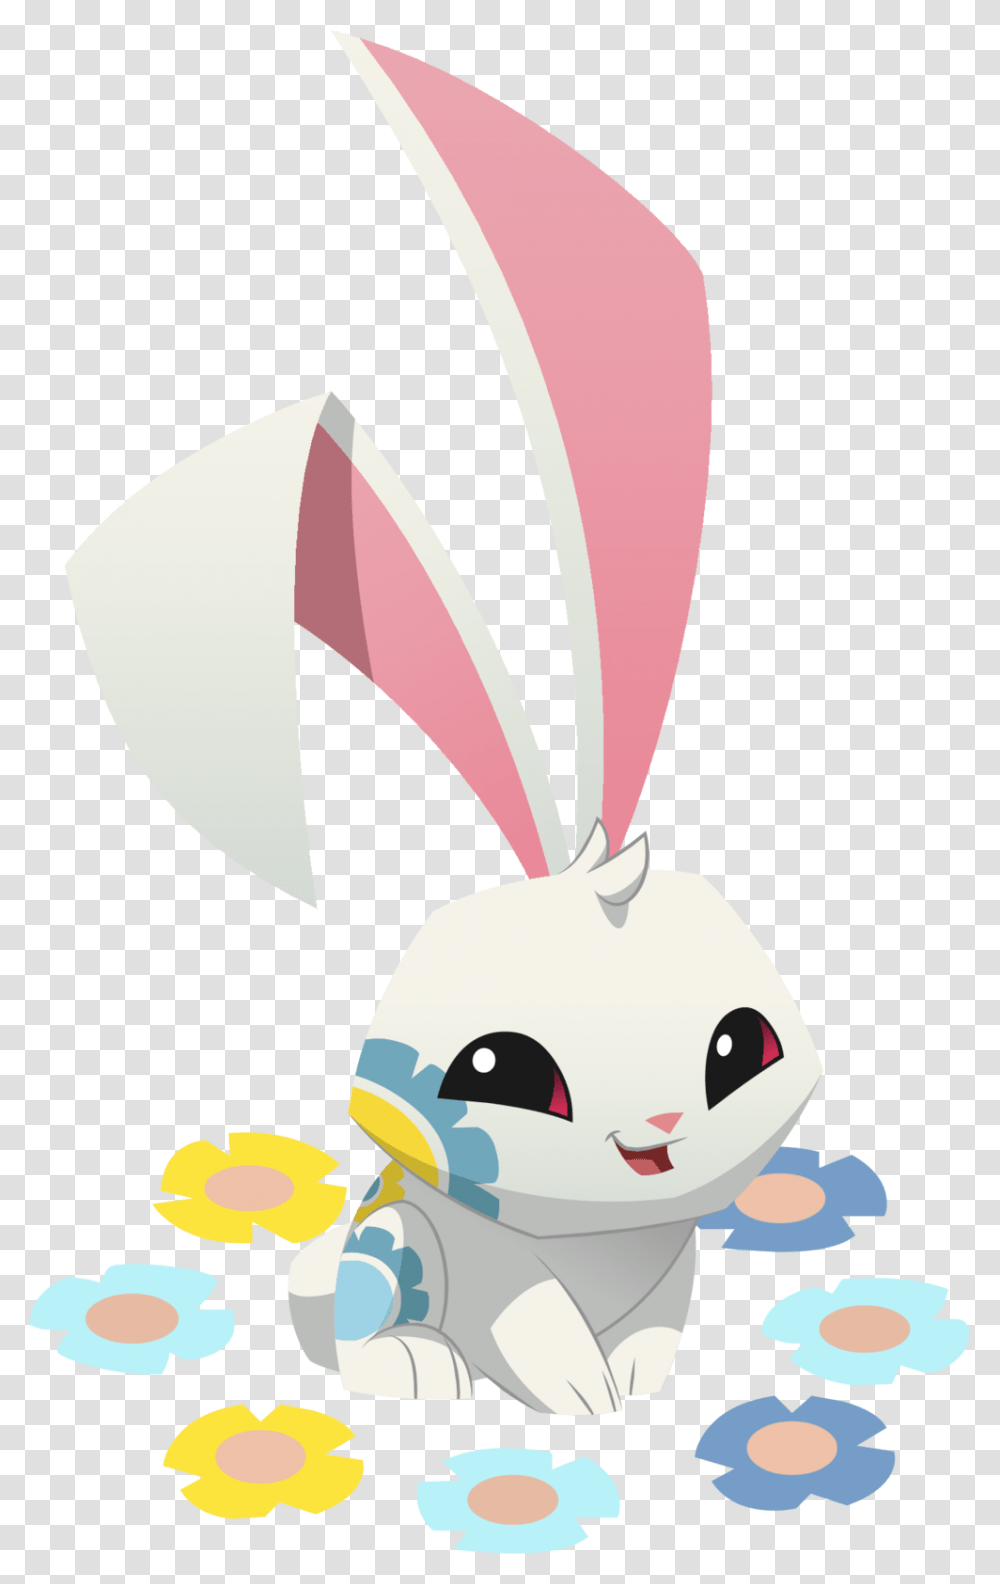 Animals - Animal Jam Archives 1027200 Images Pngio Animal Jam Spring Bunny, Insect, Invertebrate, Wasp, Bee Transparent Png